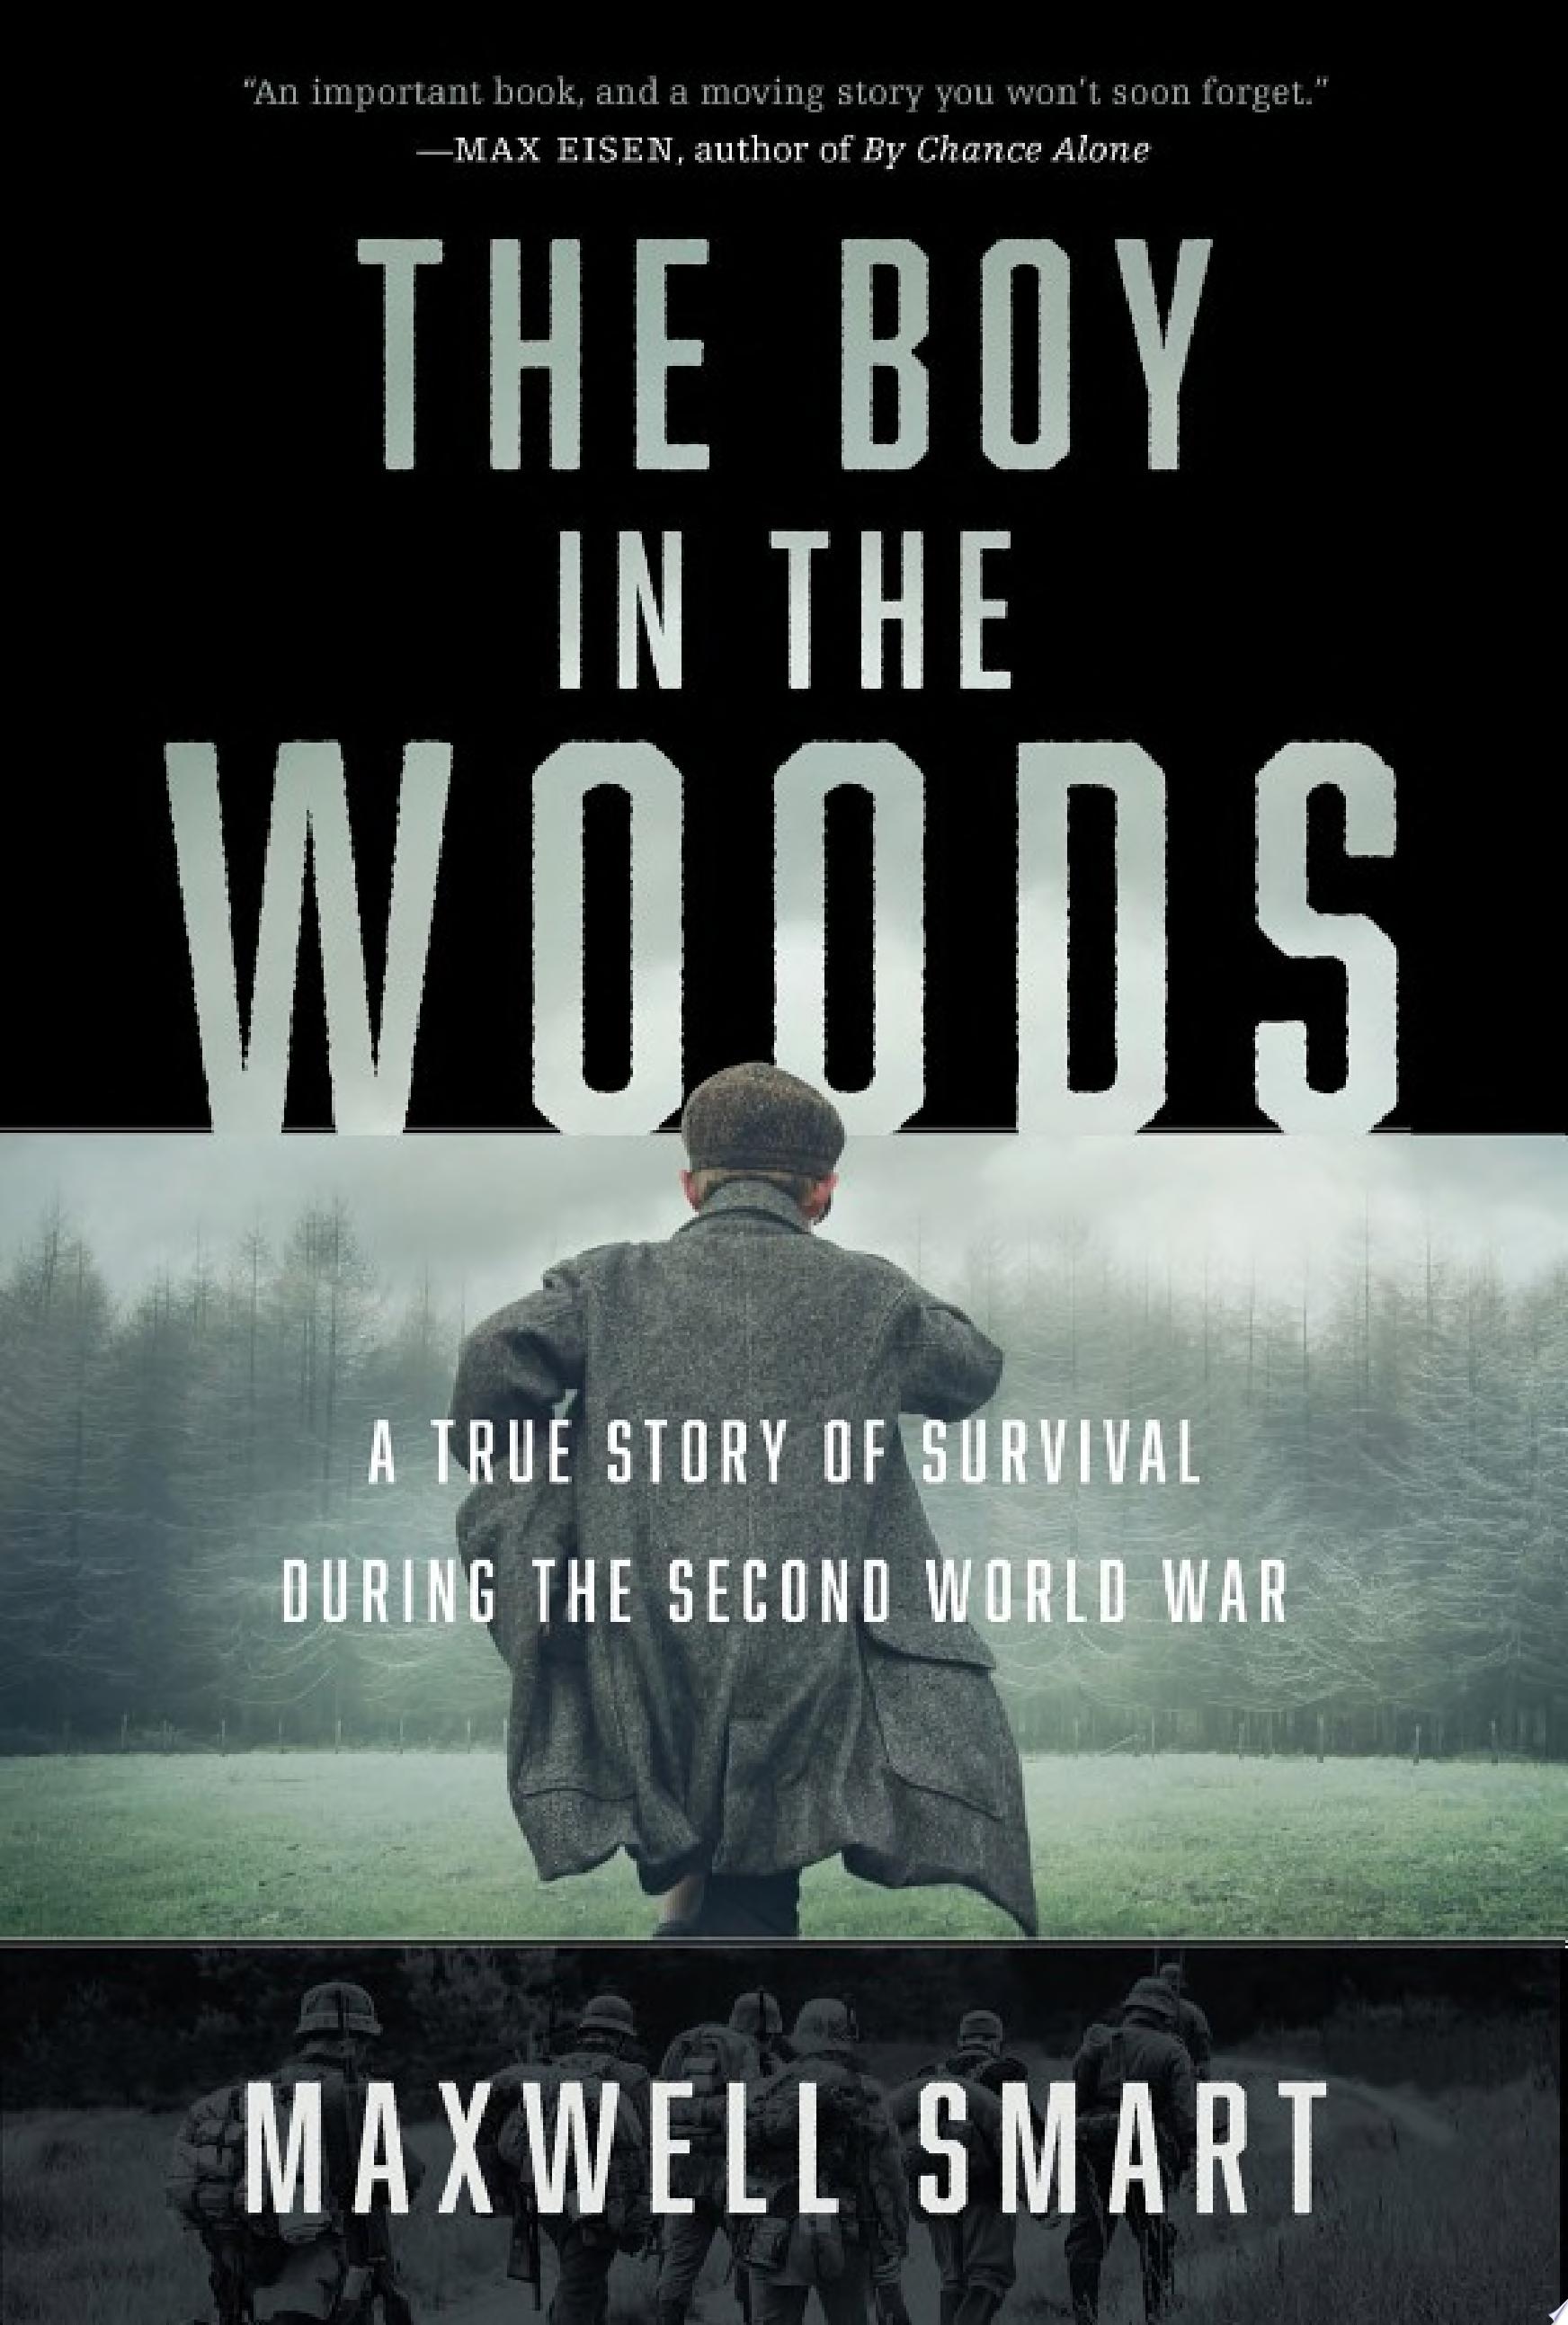 Image for "The Boy in the Woods"